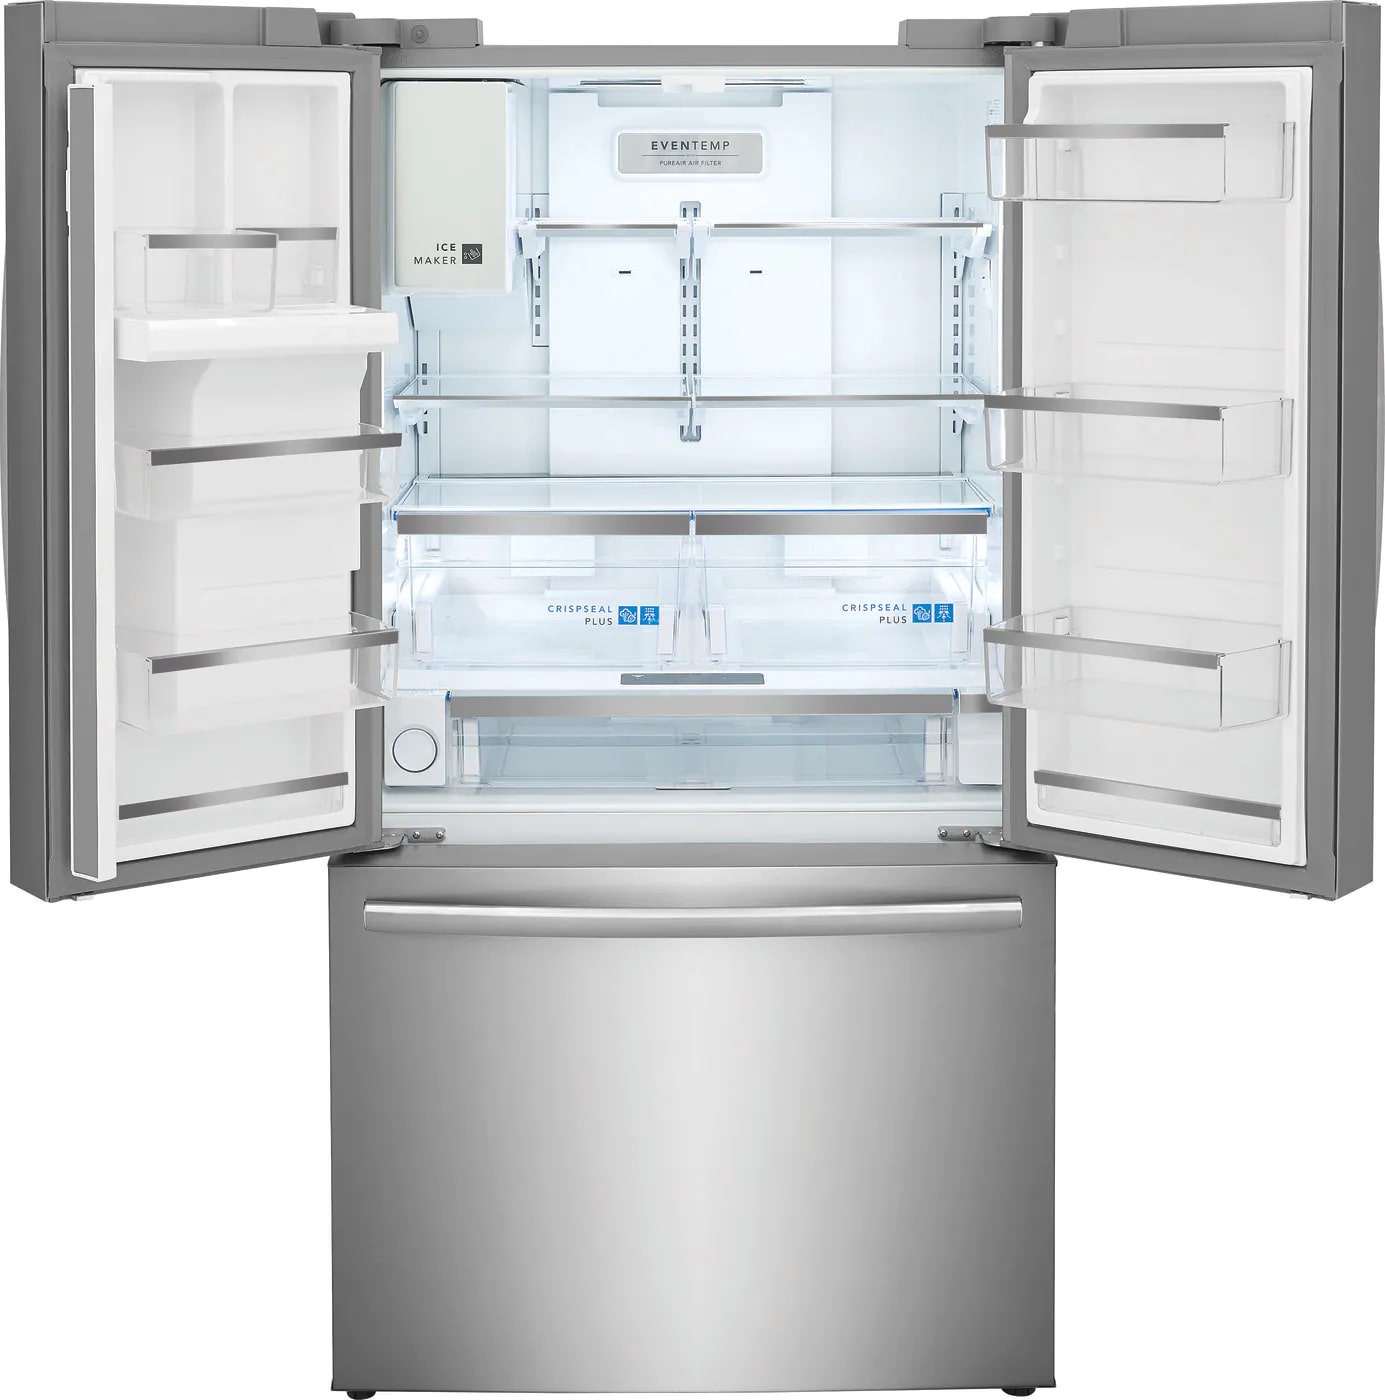 Frigidaire Gallery - 36 Inch 22.6 cu. ft French Door Refrigerator in Stainless - GRFC2353AF